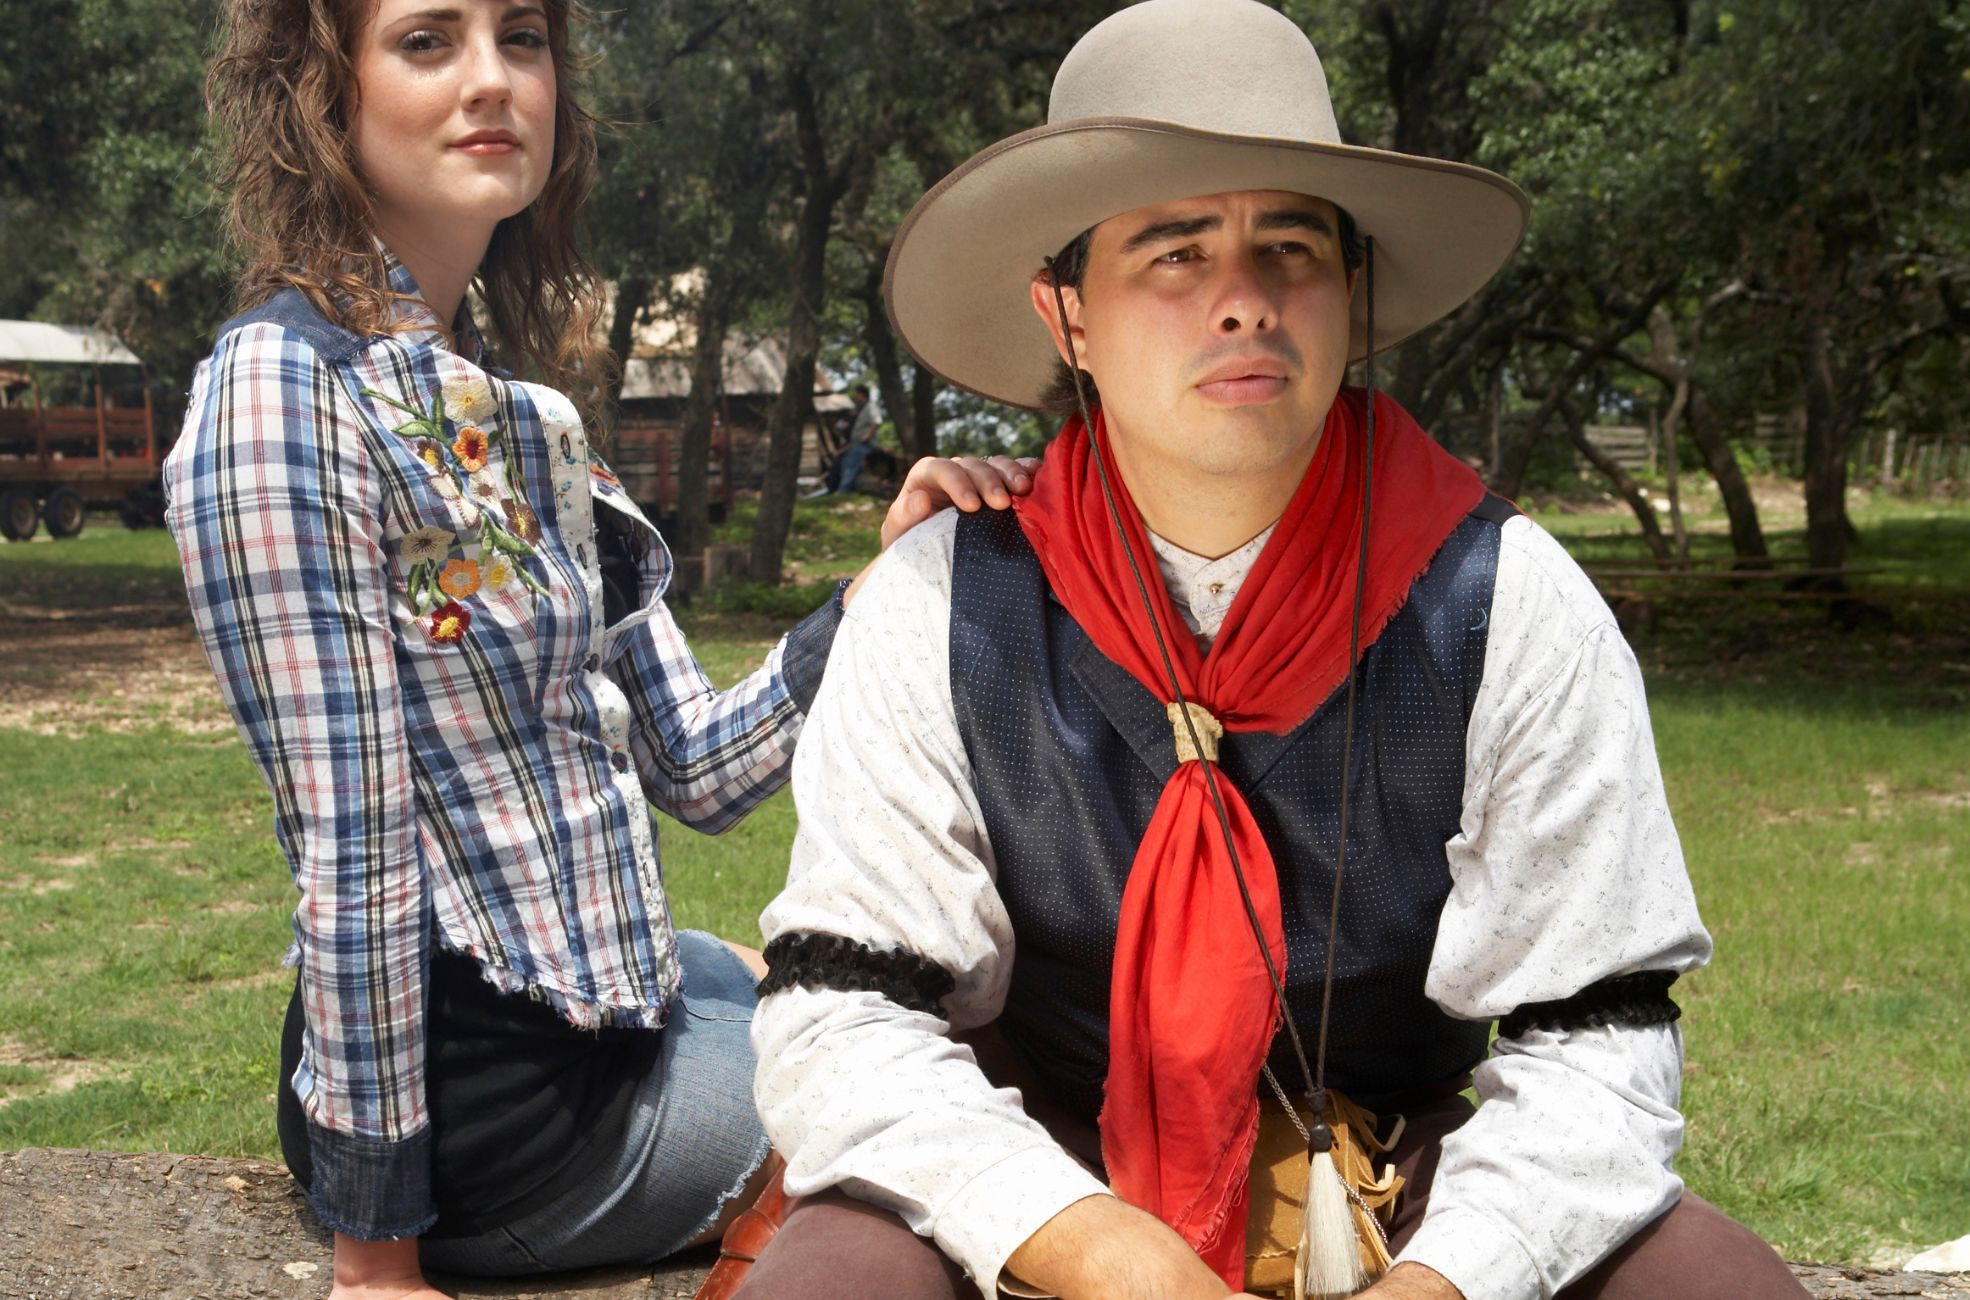 Man And Woman In Country-Themed Costumes